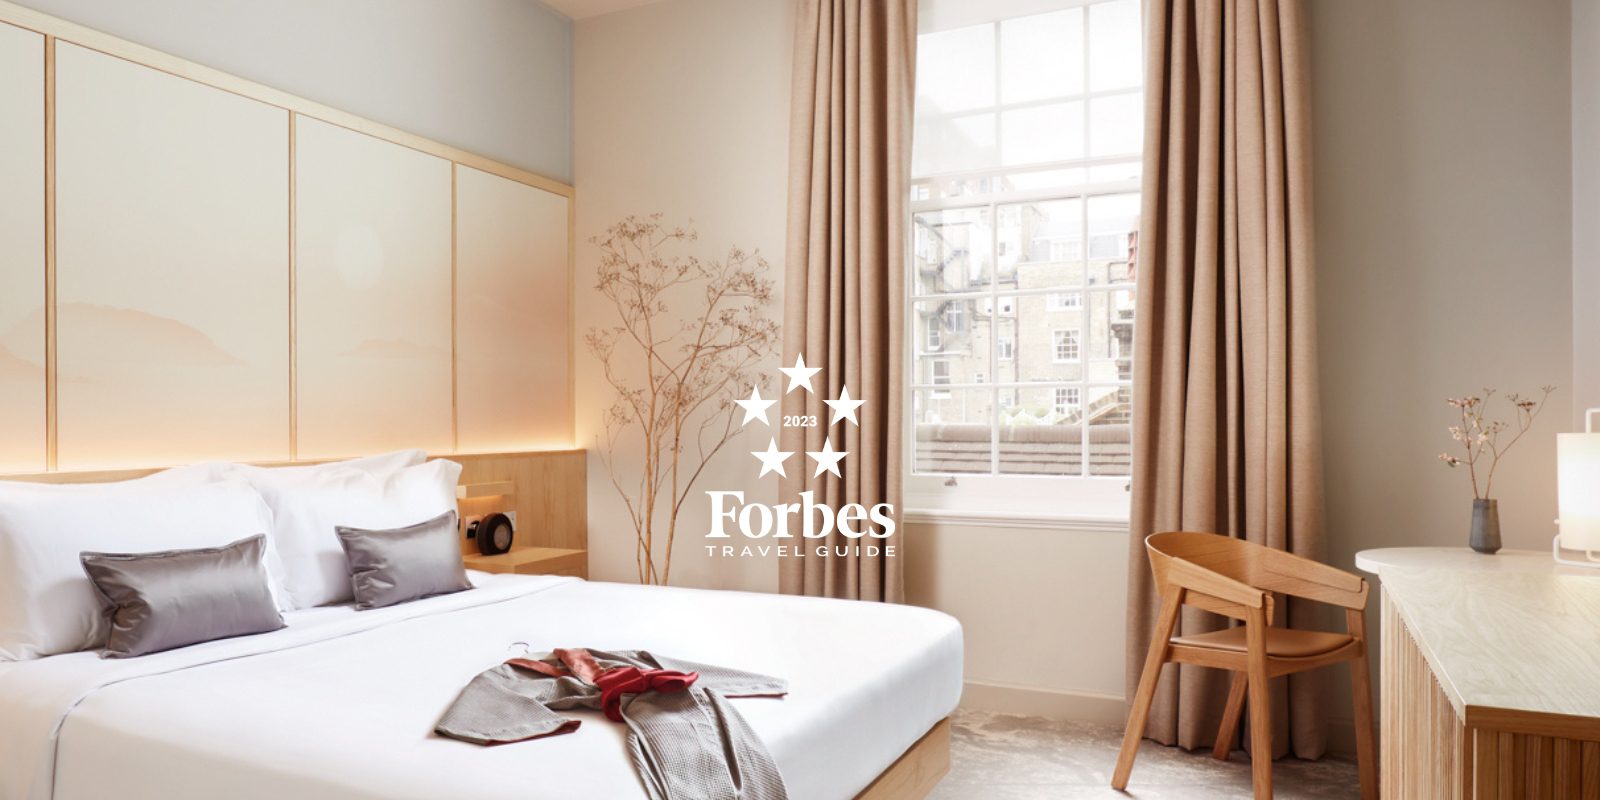 The Prince Akatoki London Awarded Its Second Consecutive 5* Rating In Forbes Travel Guide 2023 Star Awards.